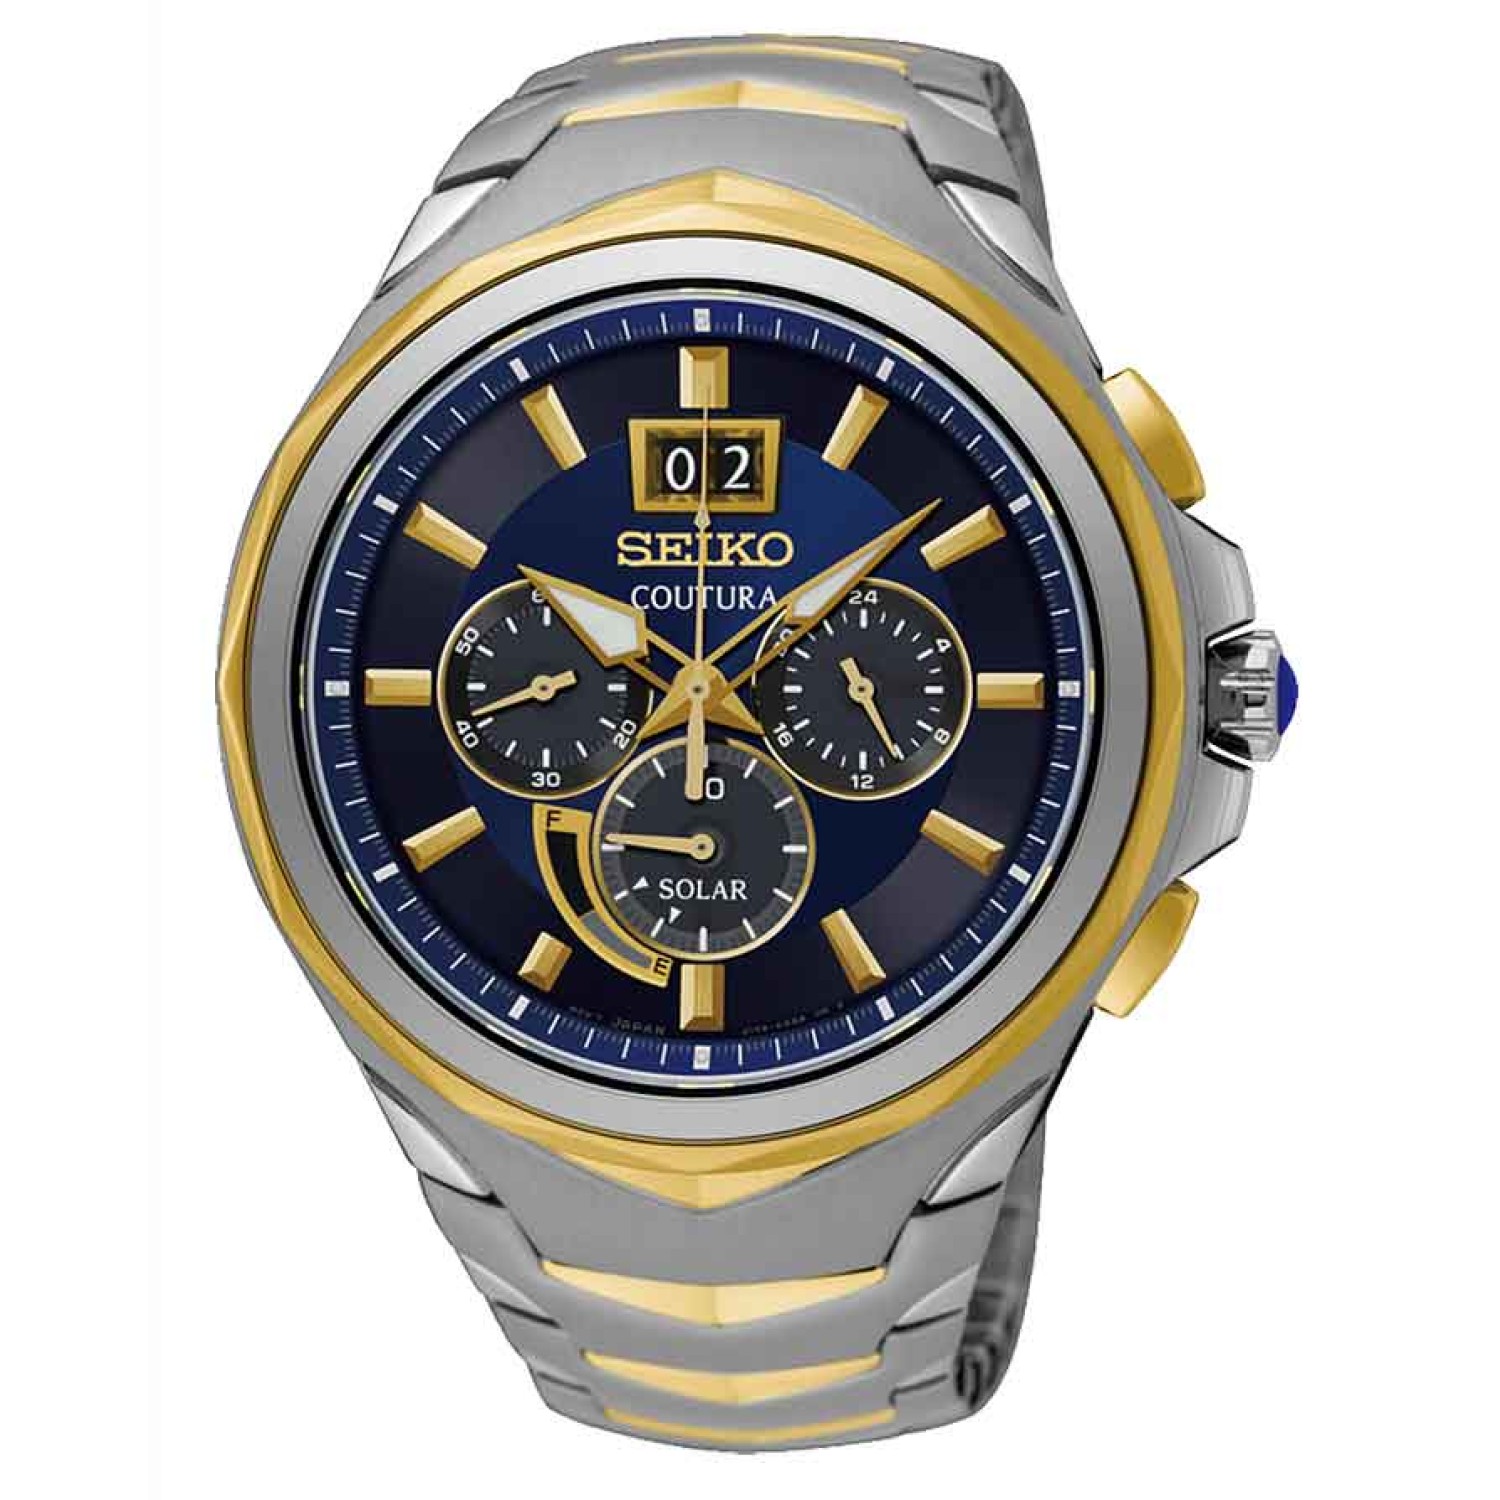 SSC642P Seiko Coutura Solar Chronograph Watch. SSC642P Seiko Coutura Solar Chronograph Watch is now available at Christies Papatoetoe or onlineLAYBUY - Pay it easy, in 6 weekly payments and have it now. Only pay the price of your purchase, when you pay yo